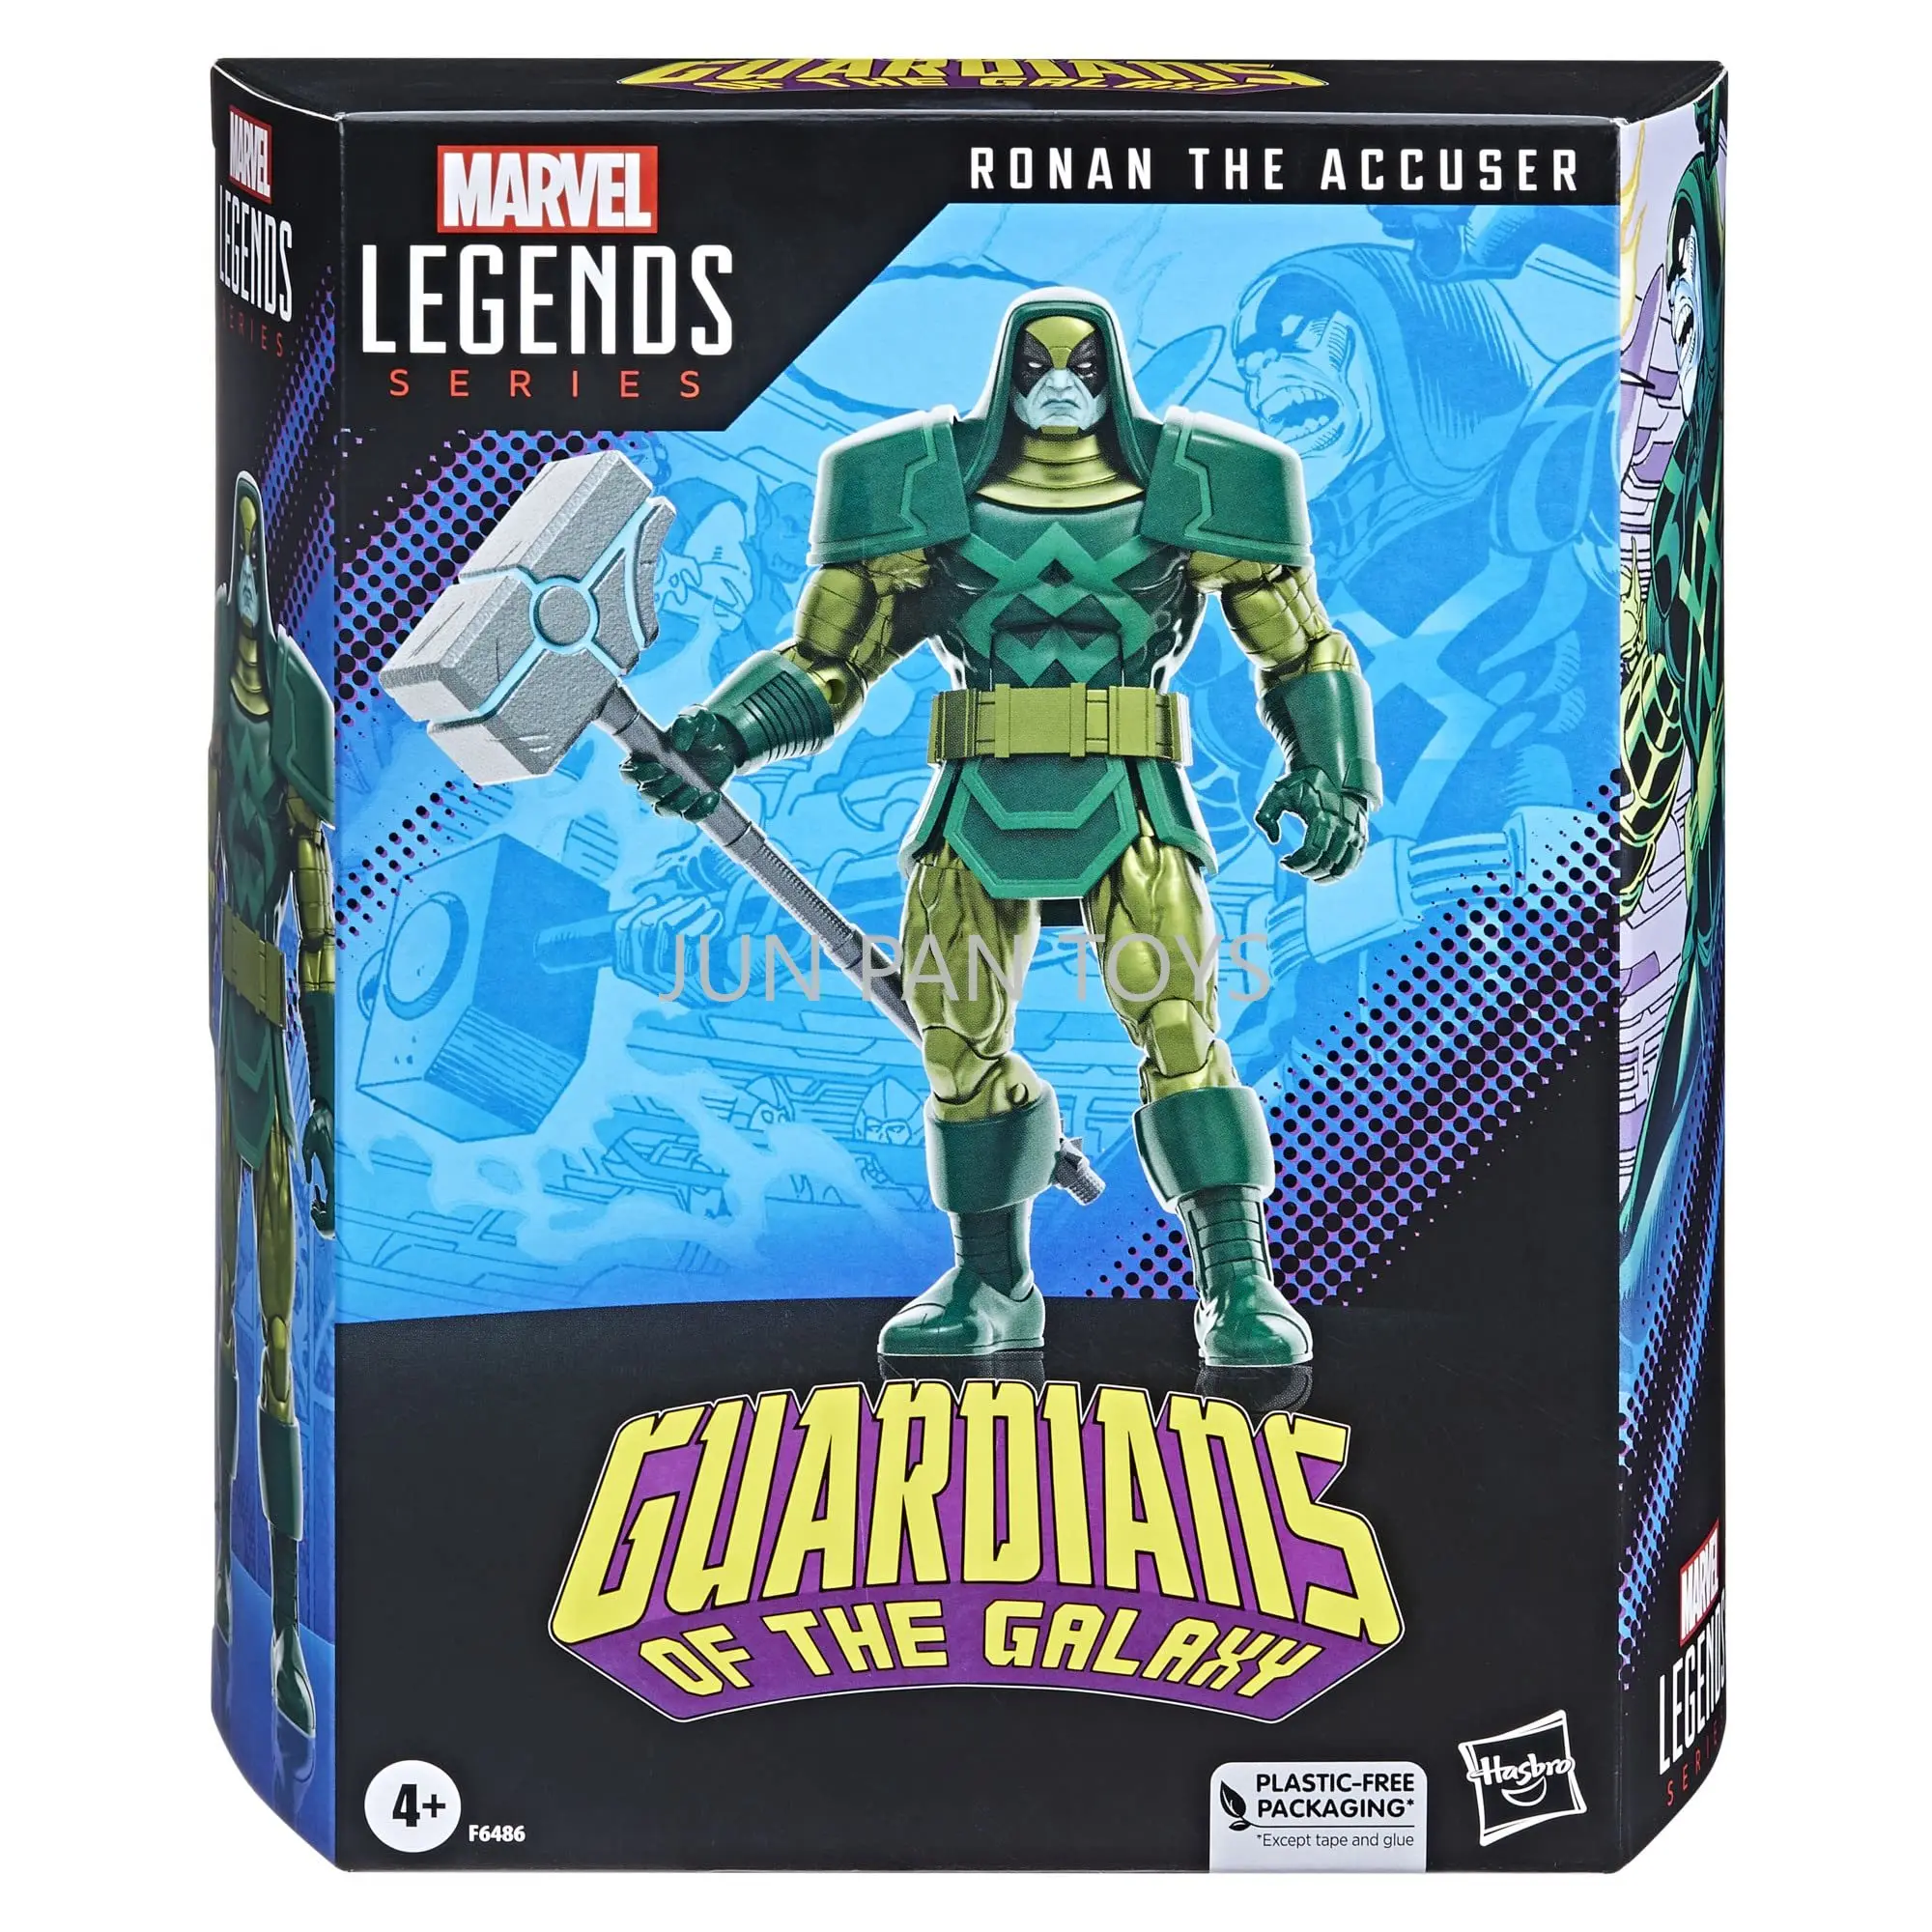 figurine-d'action-marvel-ations-end-series-ronan-the-accuser-guardians-of-the-galaxy-comics-6-pouces-modele-a-collectionner-jouets-originaux